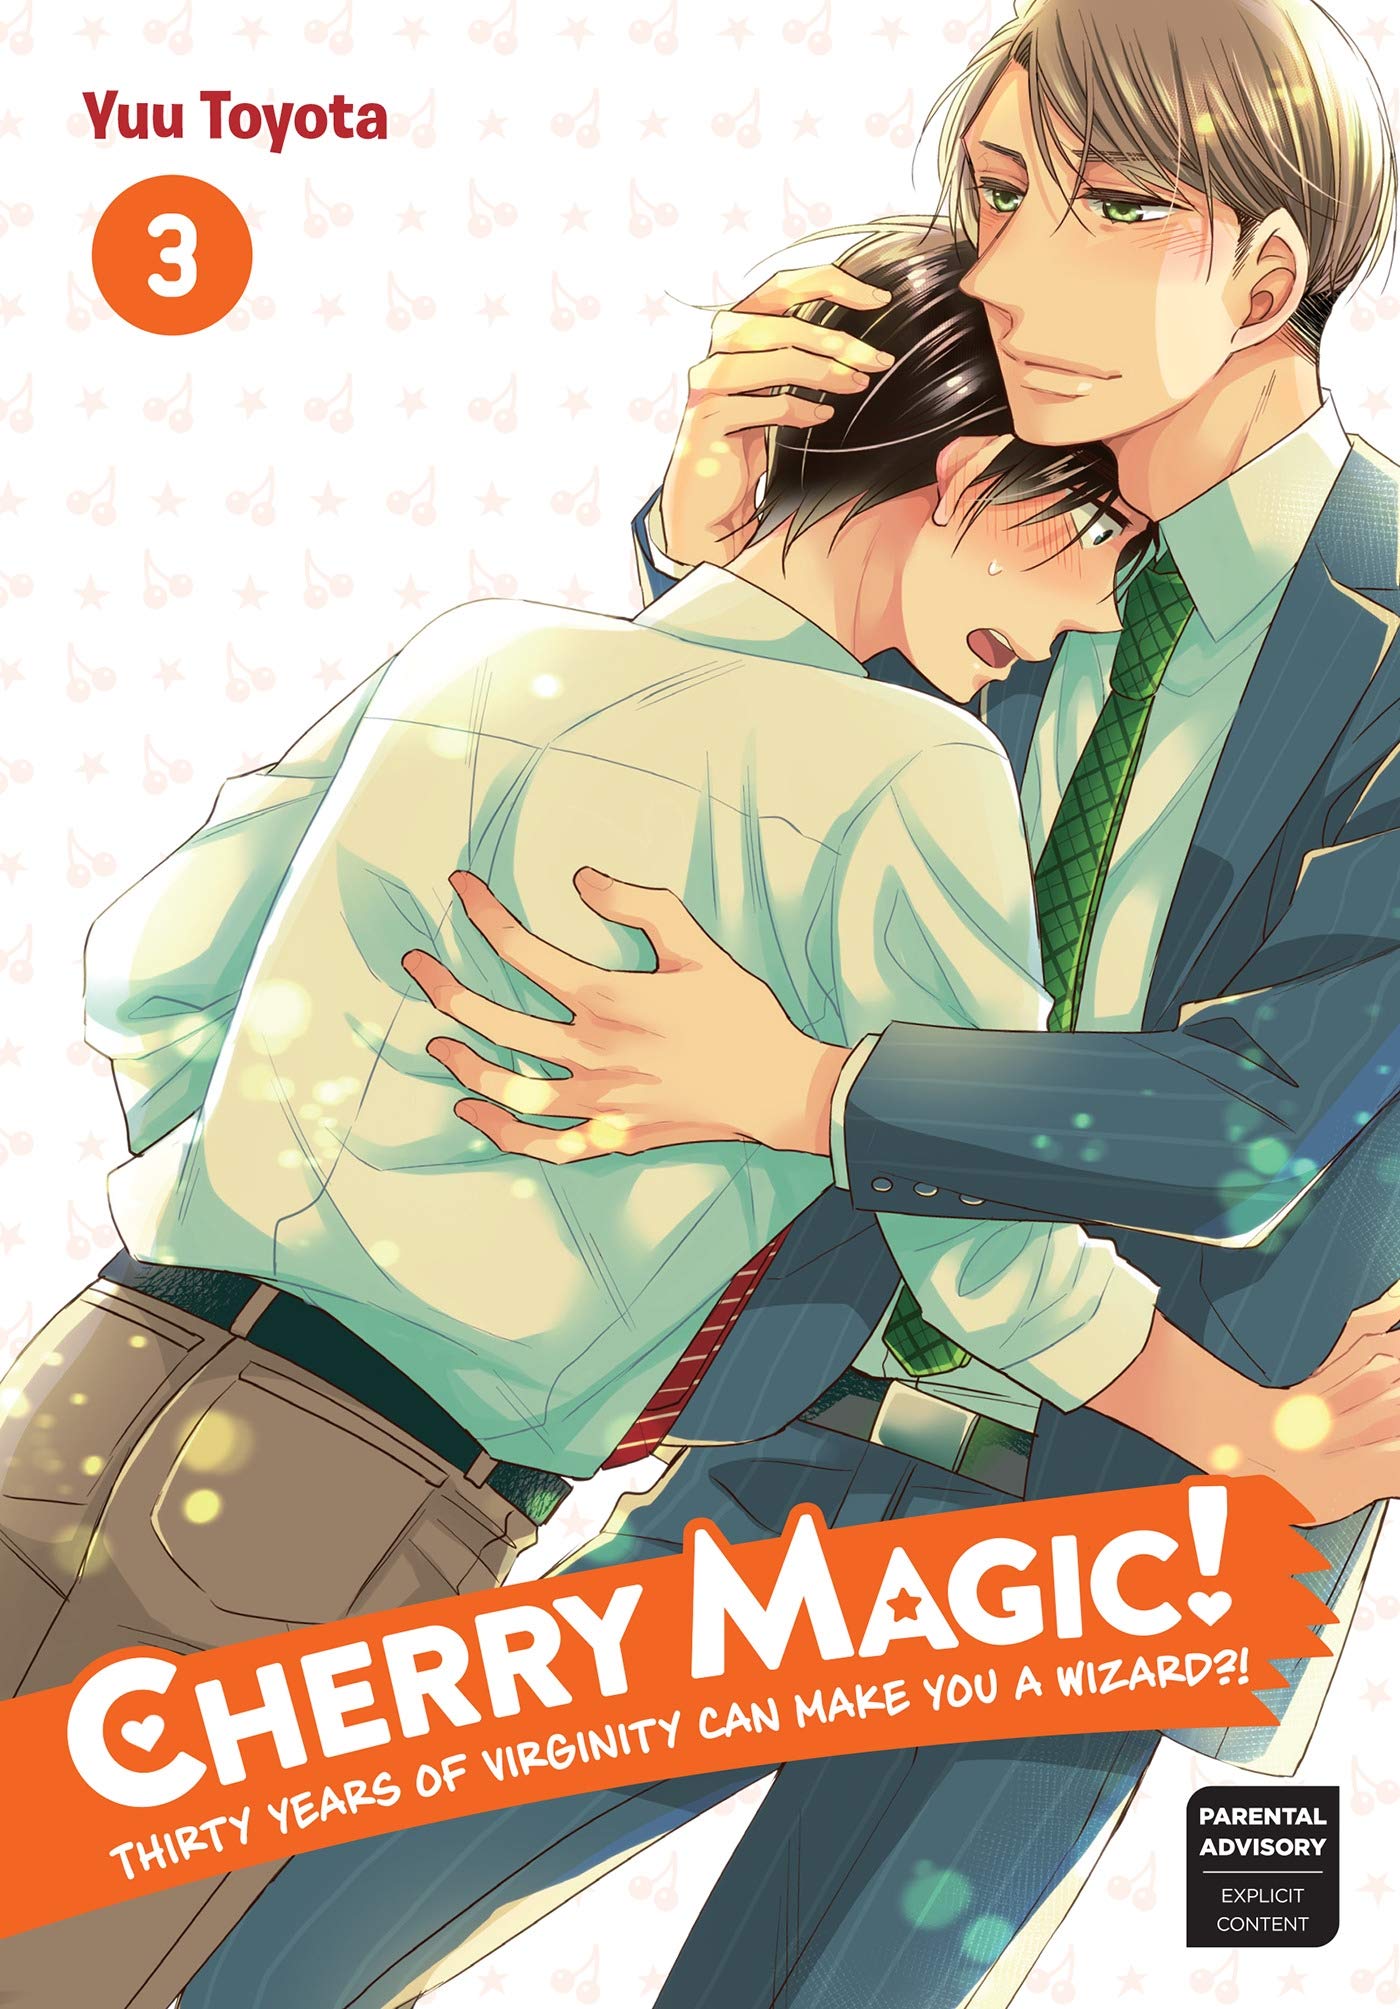 Cherry Magic! Thirty Years Of Virginity Can Make You a Wizard?! Vol. 3